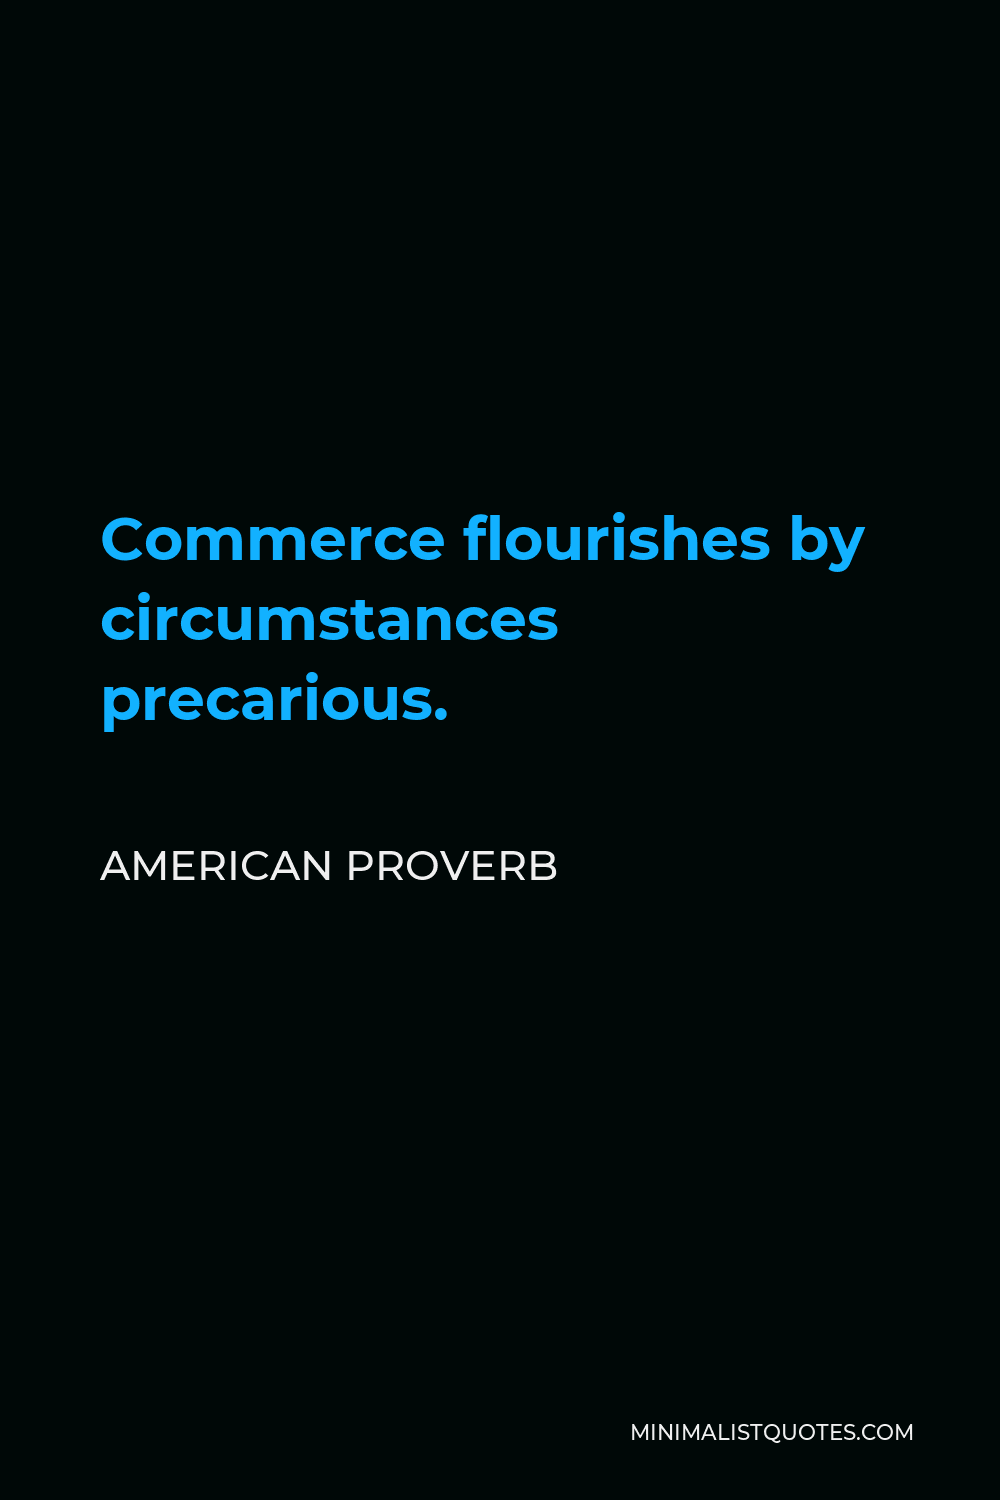 American Proverb Quote - Commerce flourishes by circumstances precarious.